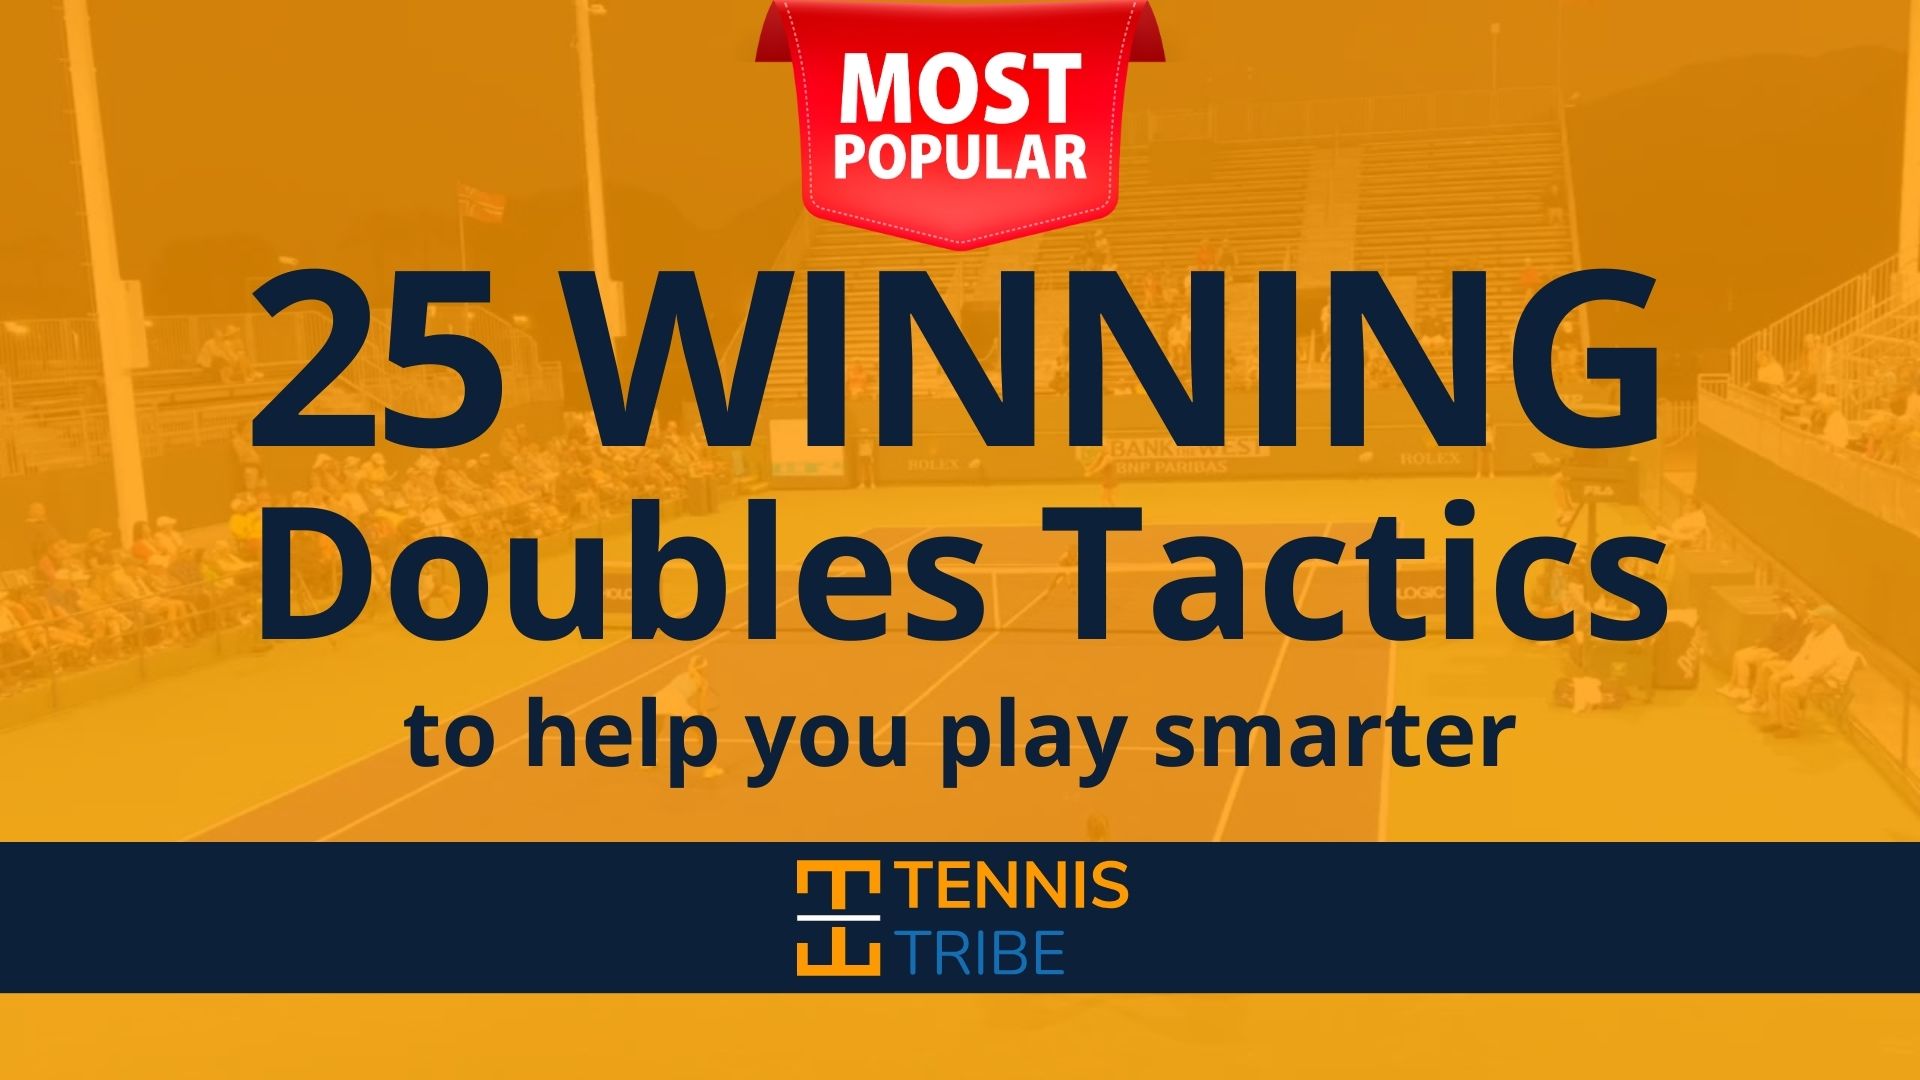 25 Winning Doubles Tactics to help you play smarter